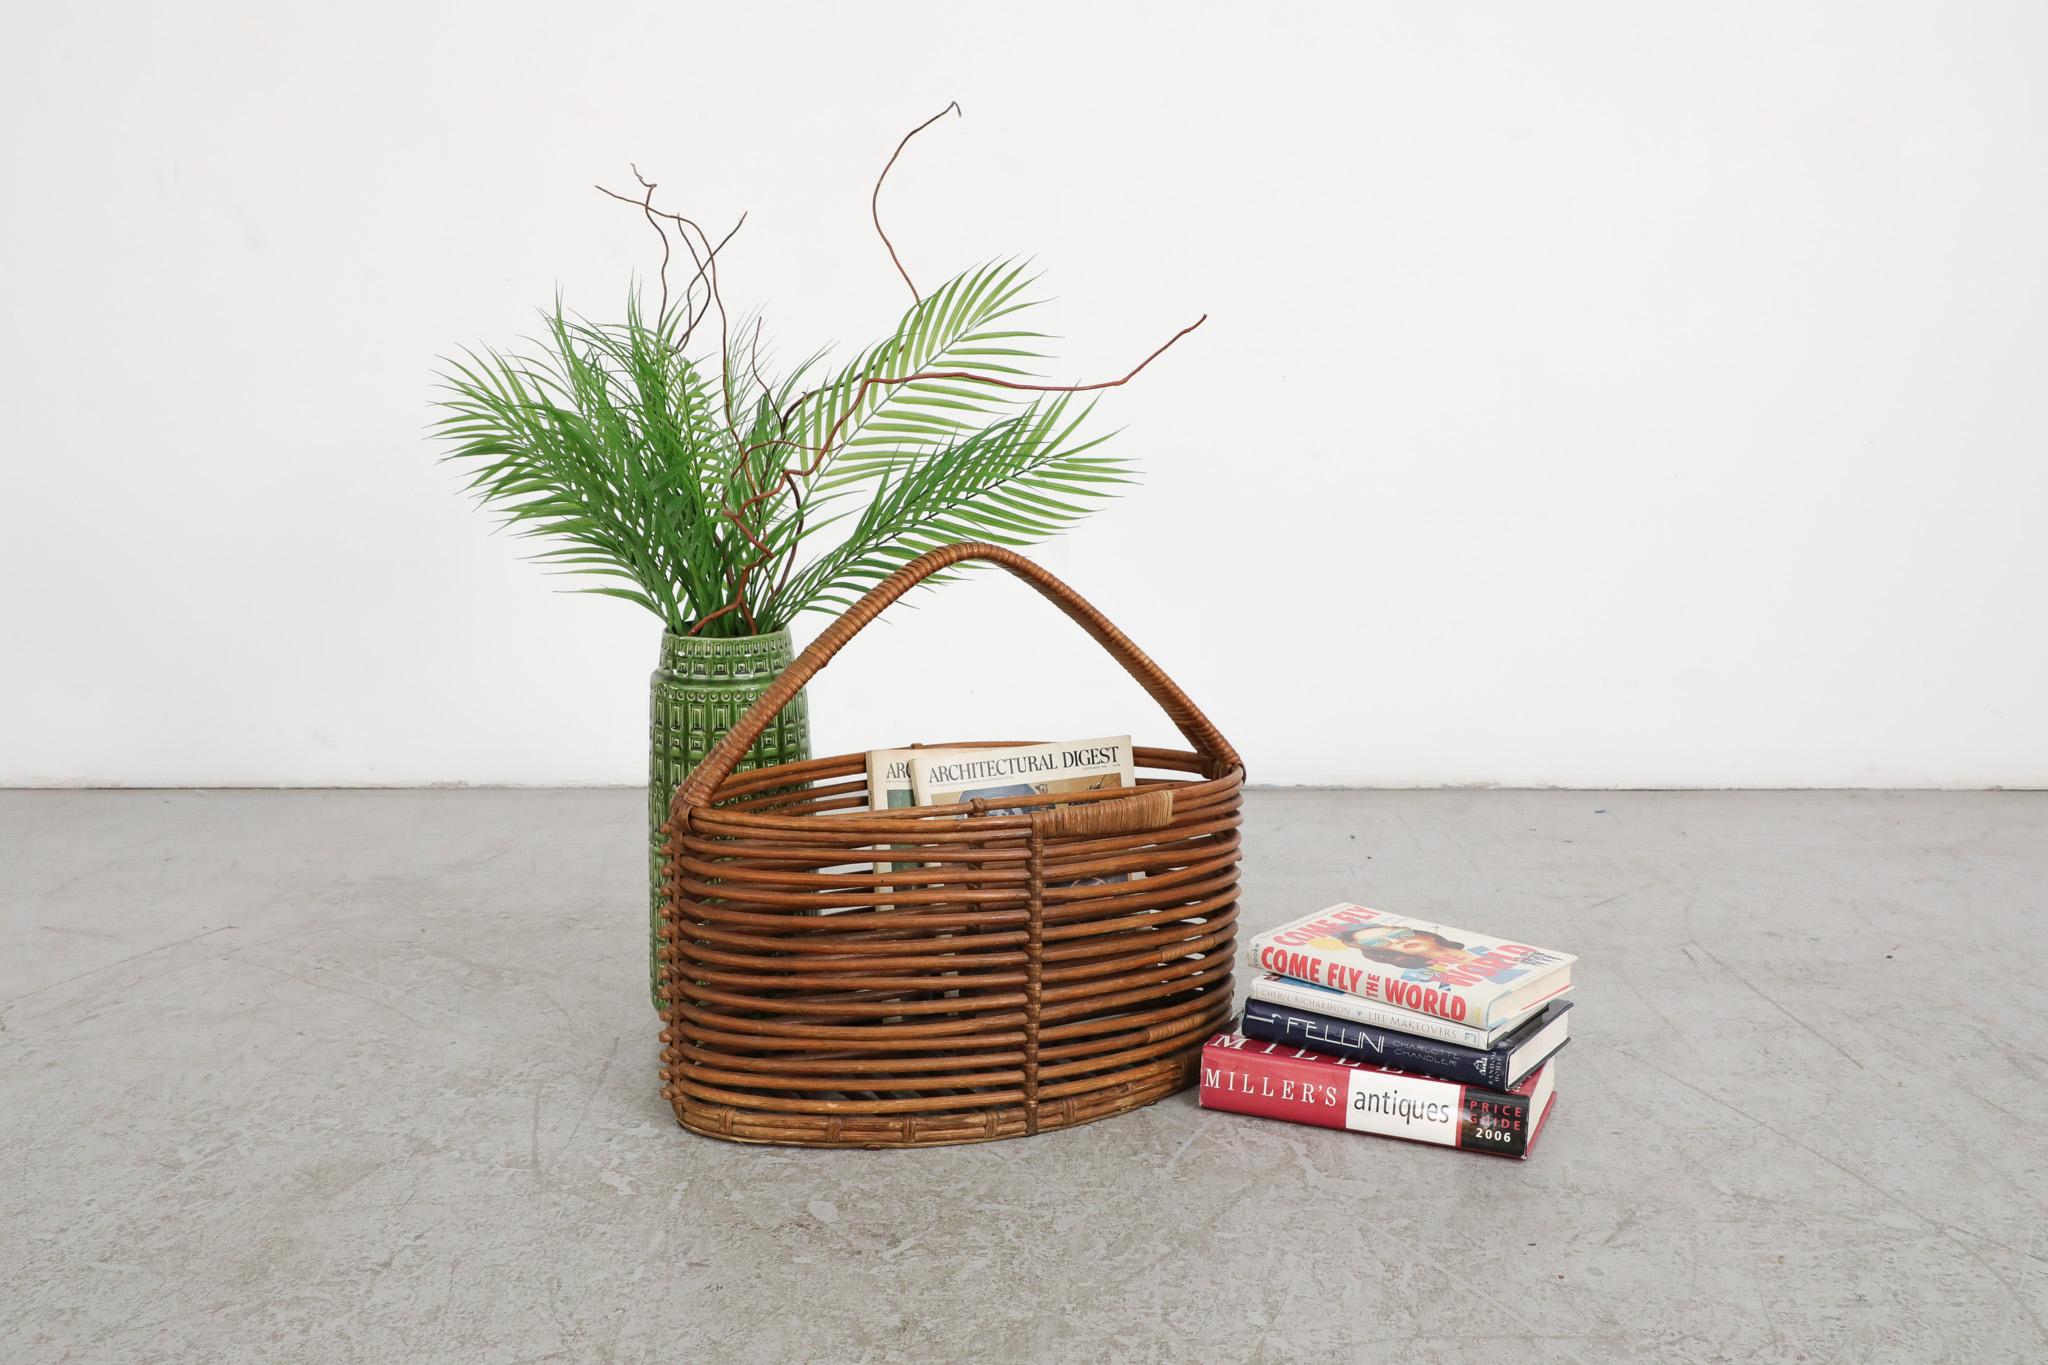 Beautiful, Mid-Century, hand-woven basket with handle made from young willow branches.  When used fresh, they are flexible and subsequently harden - which makes for a sturdy frame. This technique was and is commonly used to build fences in the